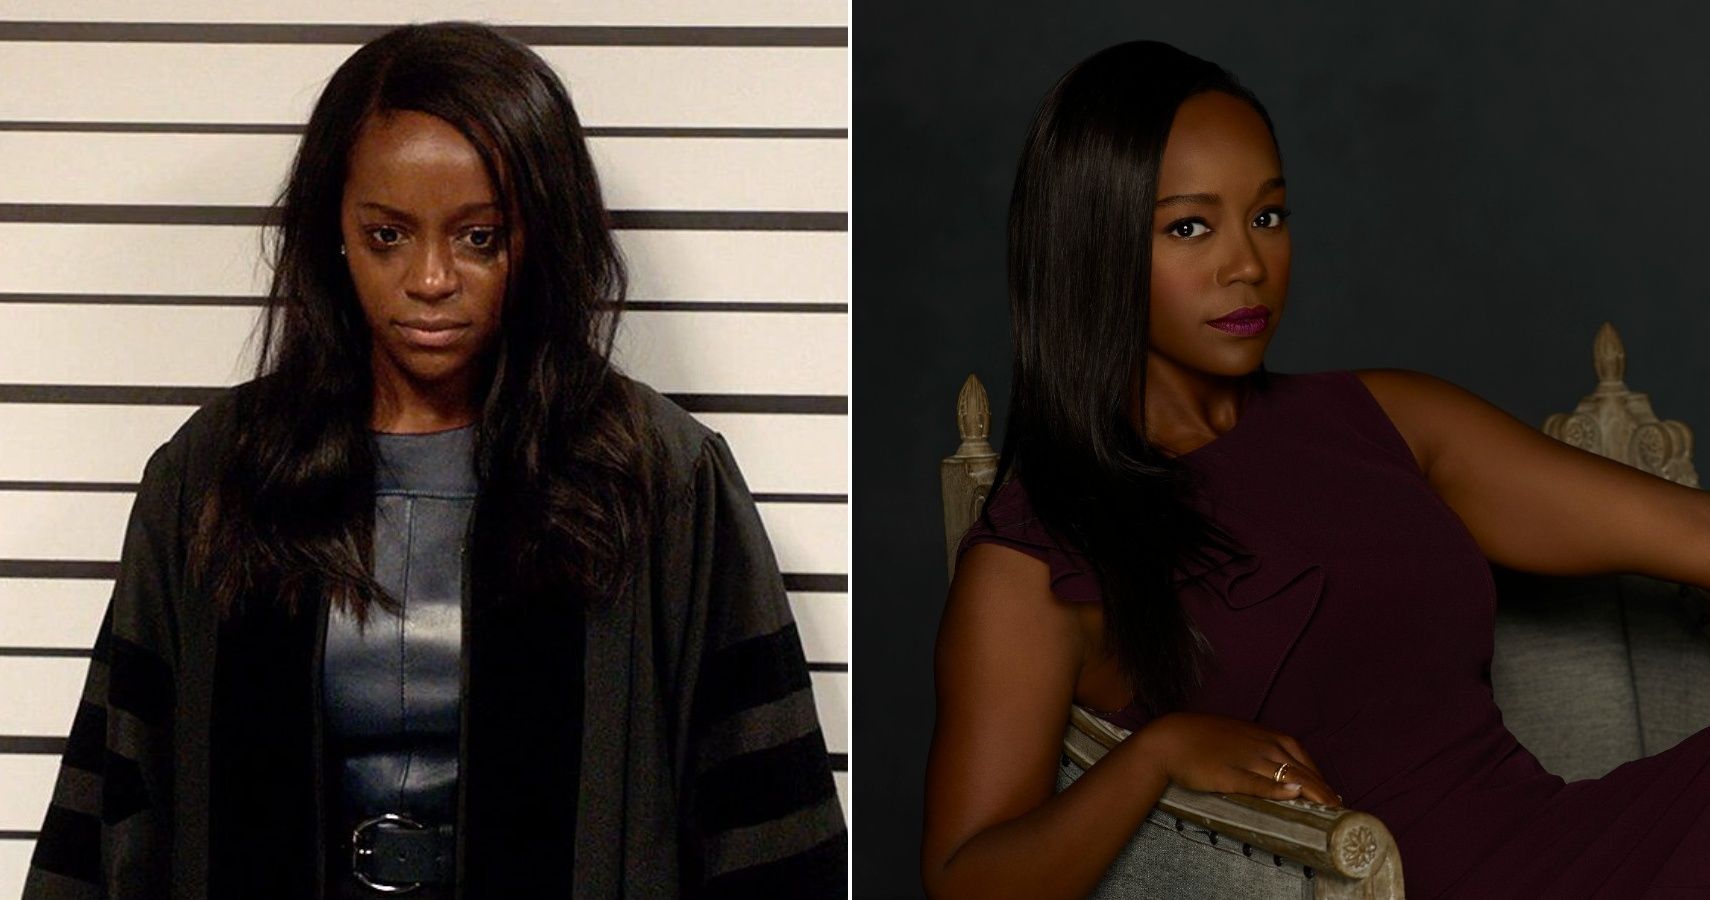 How To Get Away With Murder The 5 Best Things Michaela Ever Did (& The 5 Worst)